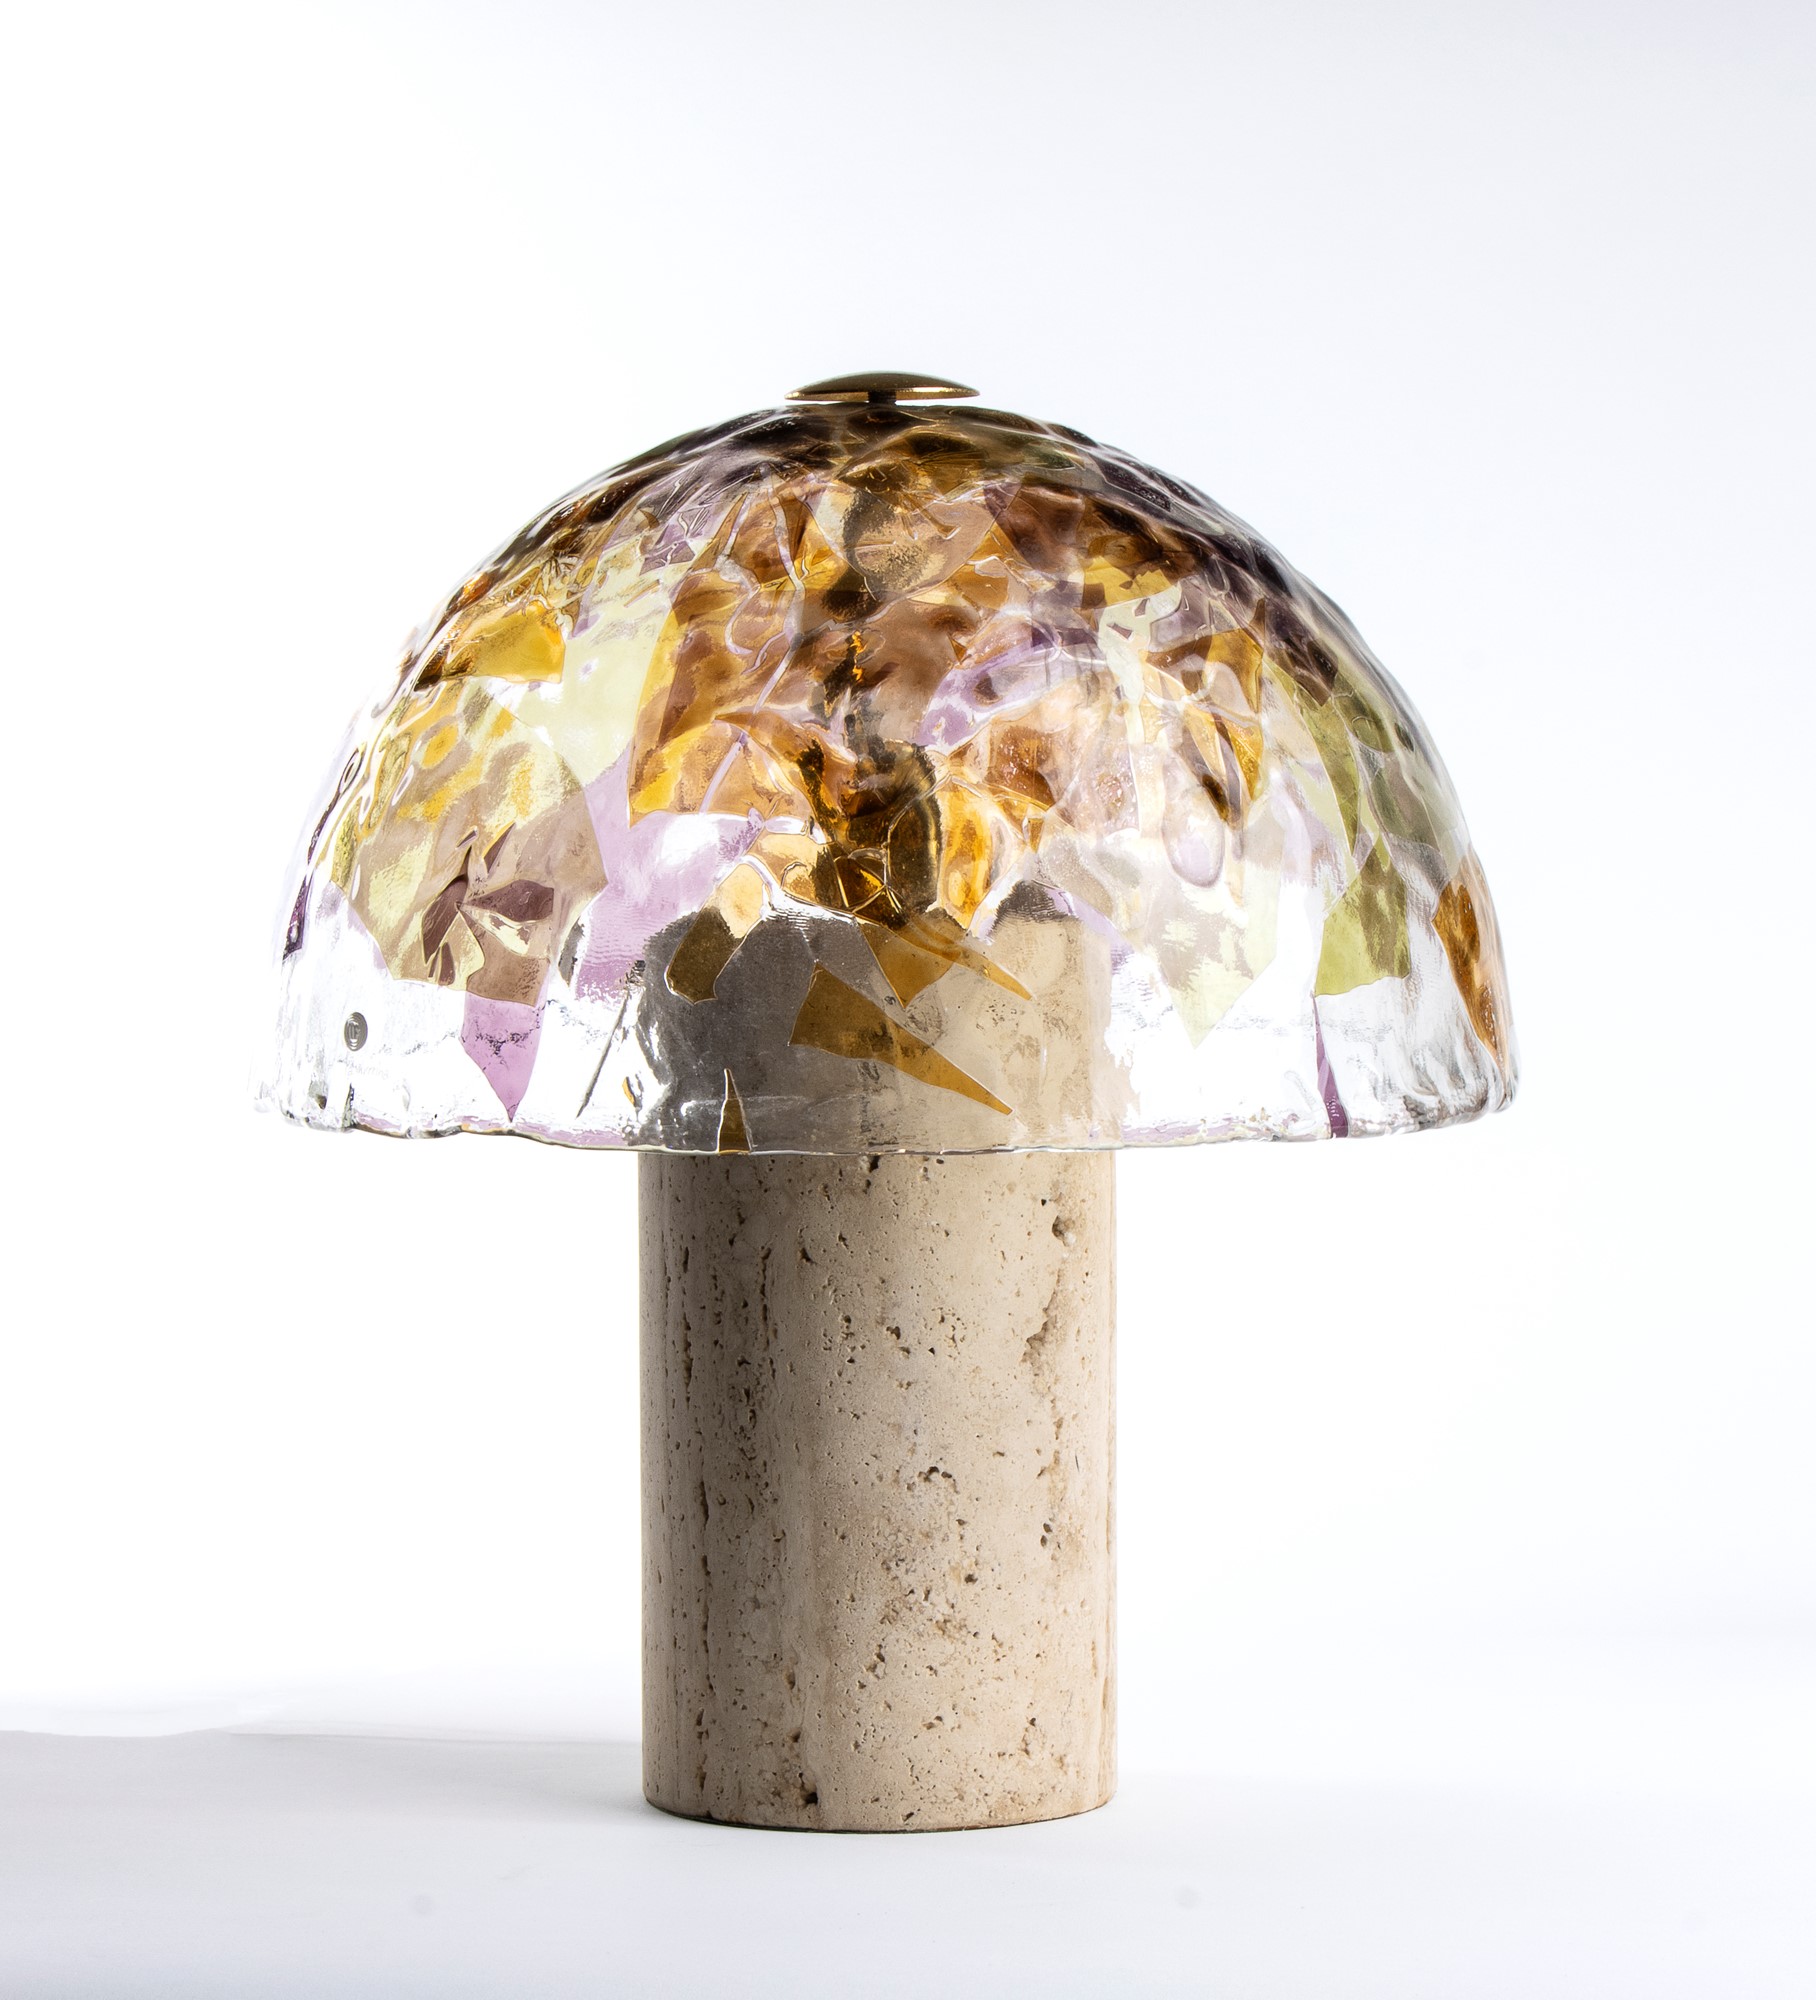 Polychrome blown glass table lamp by La Murrina - Image 6 of 15